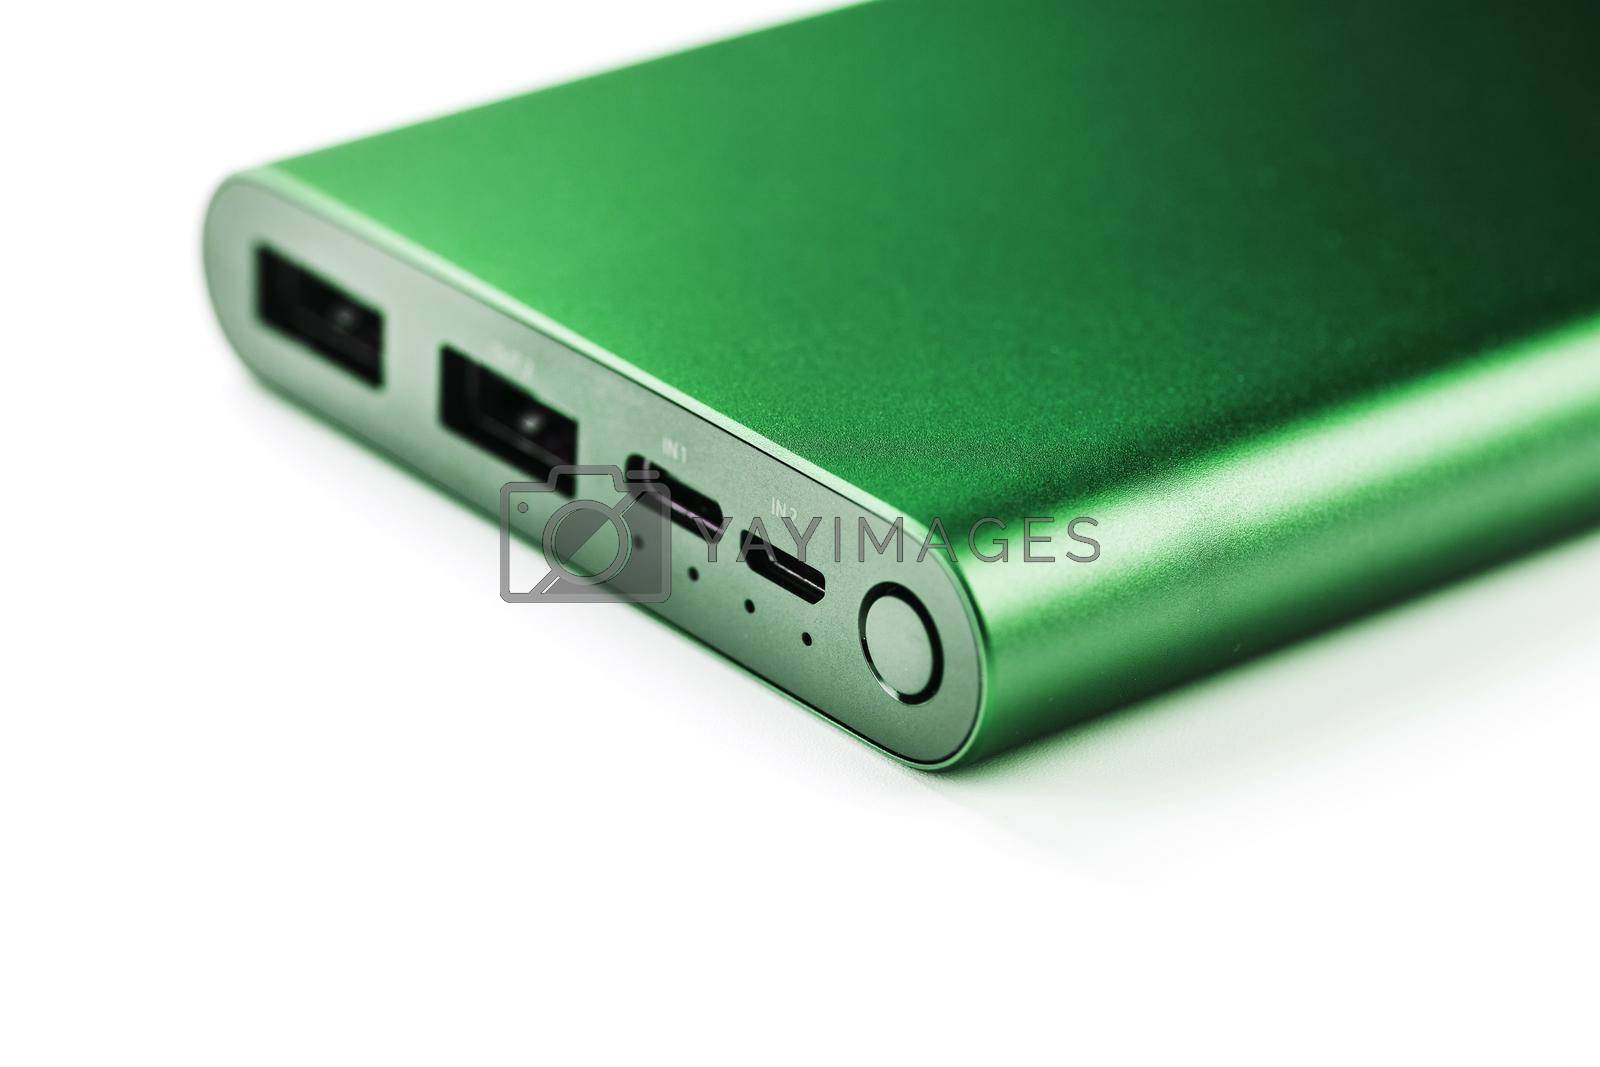 Royalty free image of Green Power Bank on a white background for charging mobile devices by AlexGrec